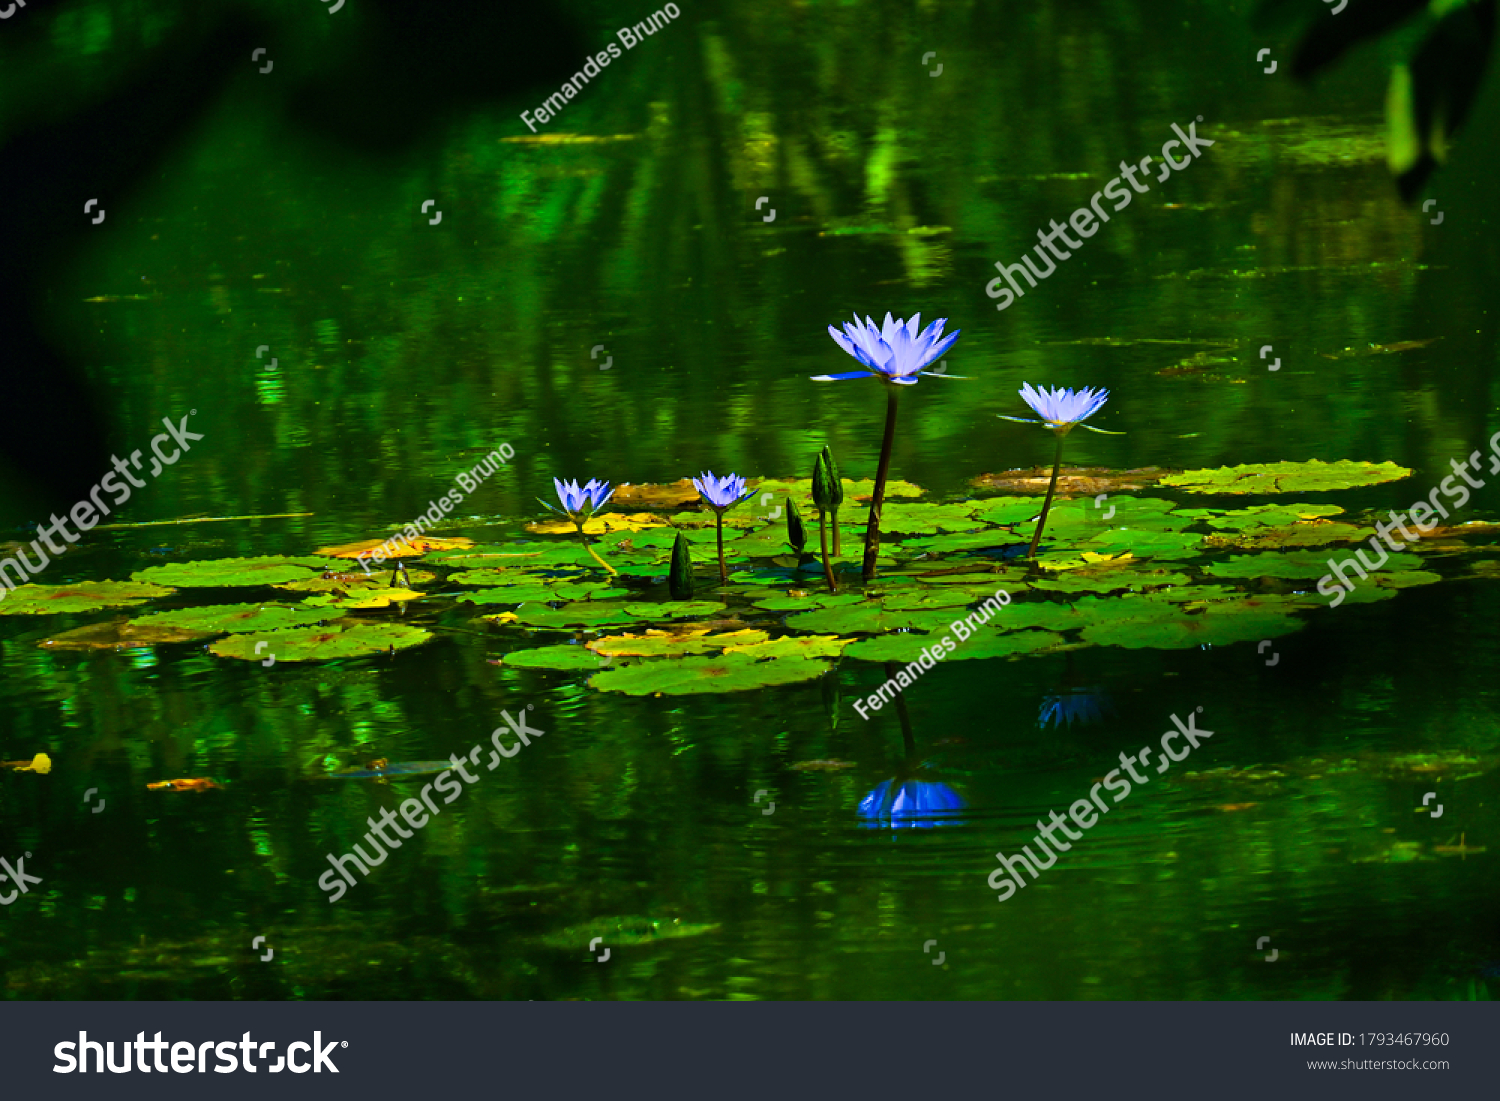 Nature Fauna and Flora with frogs on water lily. #1793467960